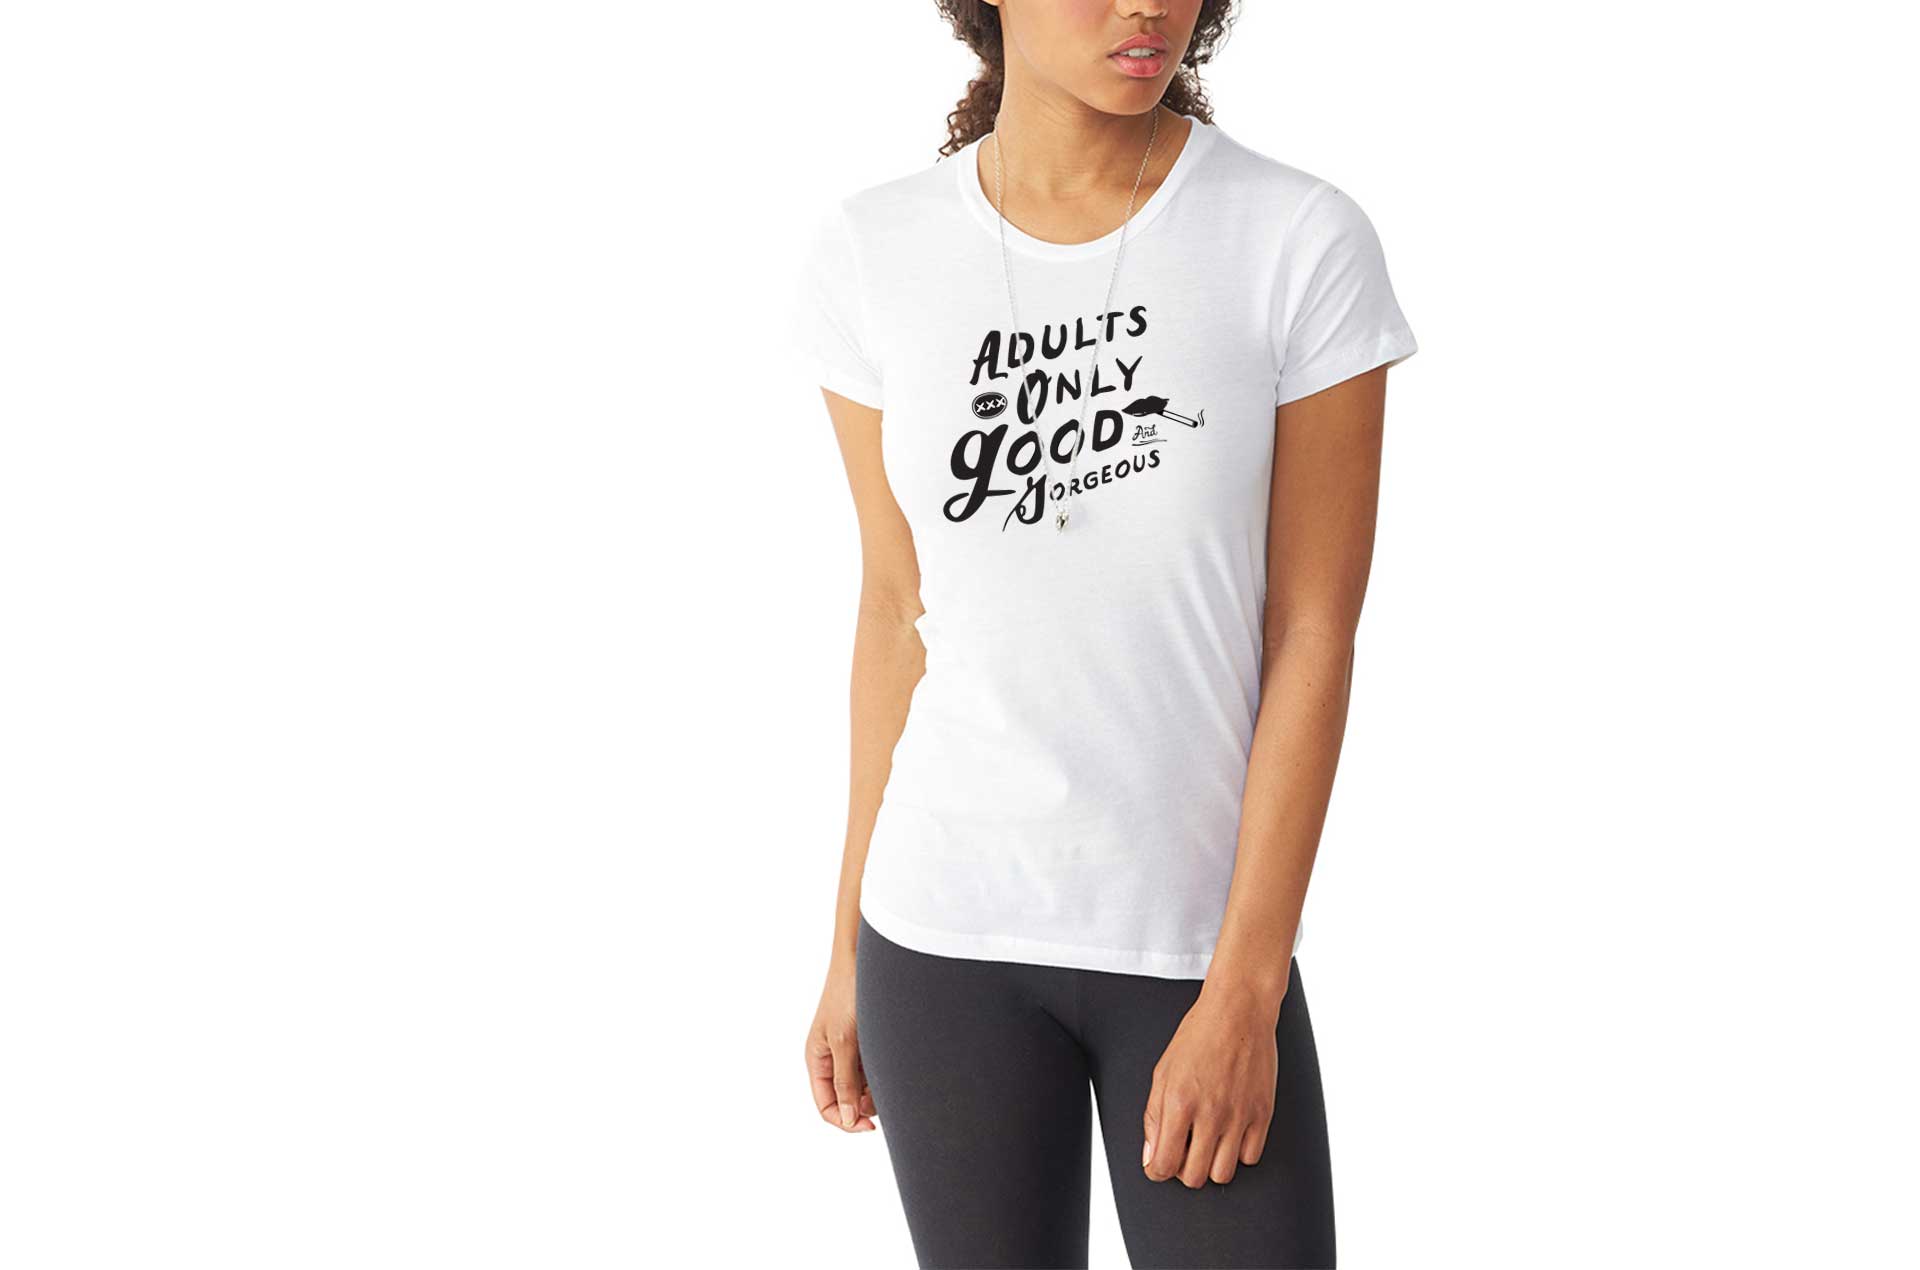 Adults Only – Women’s Tee